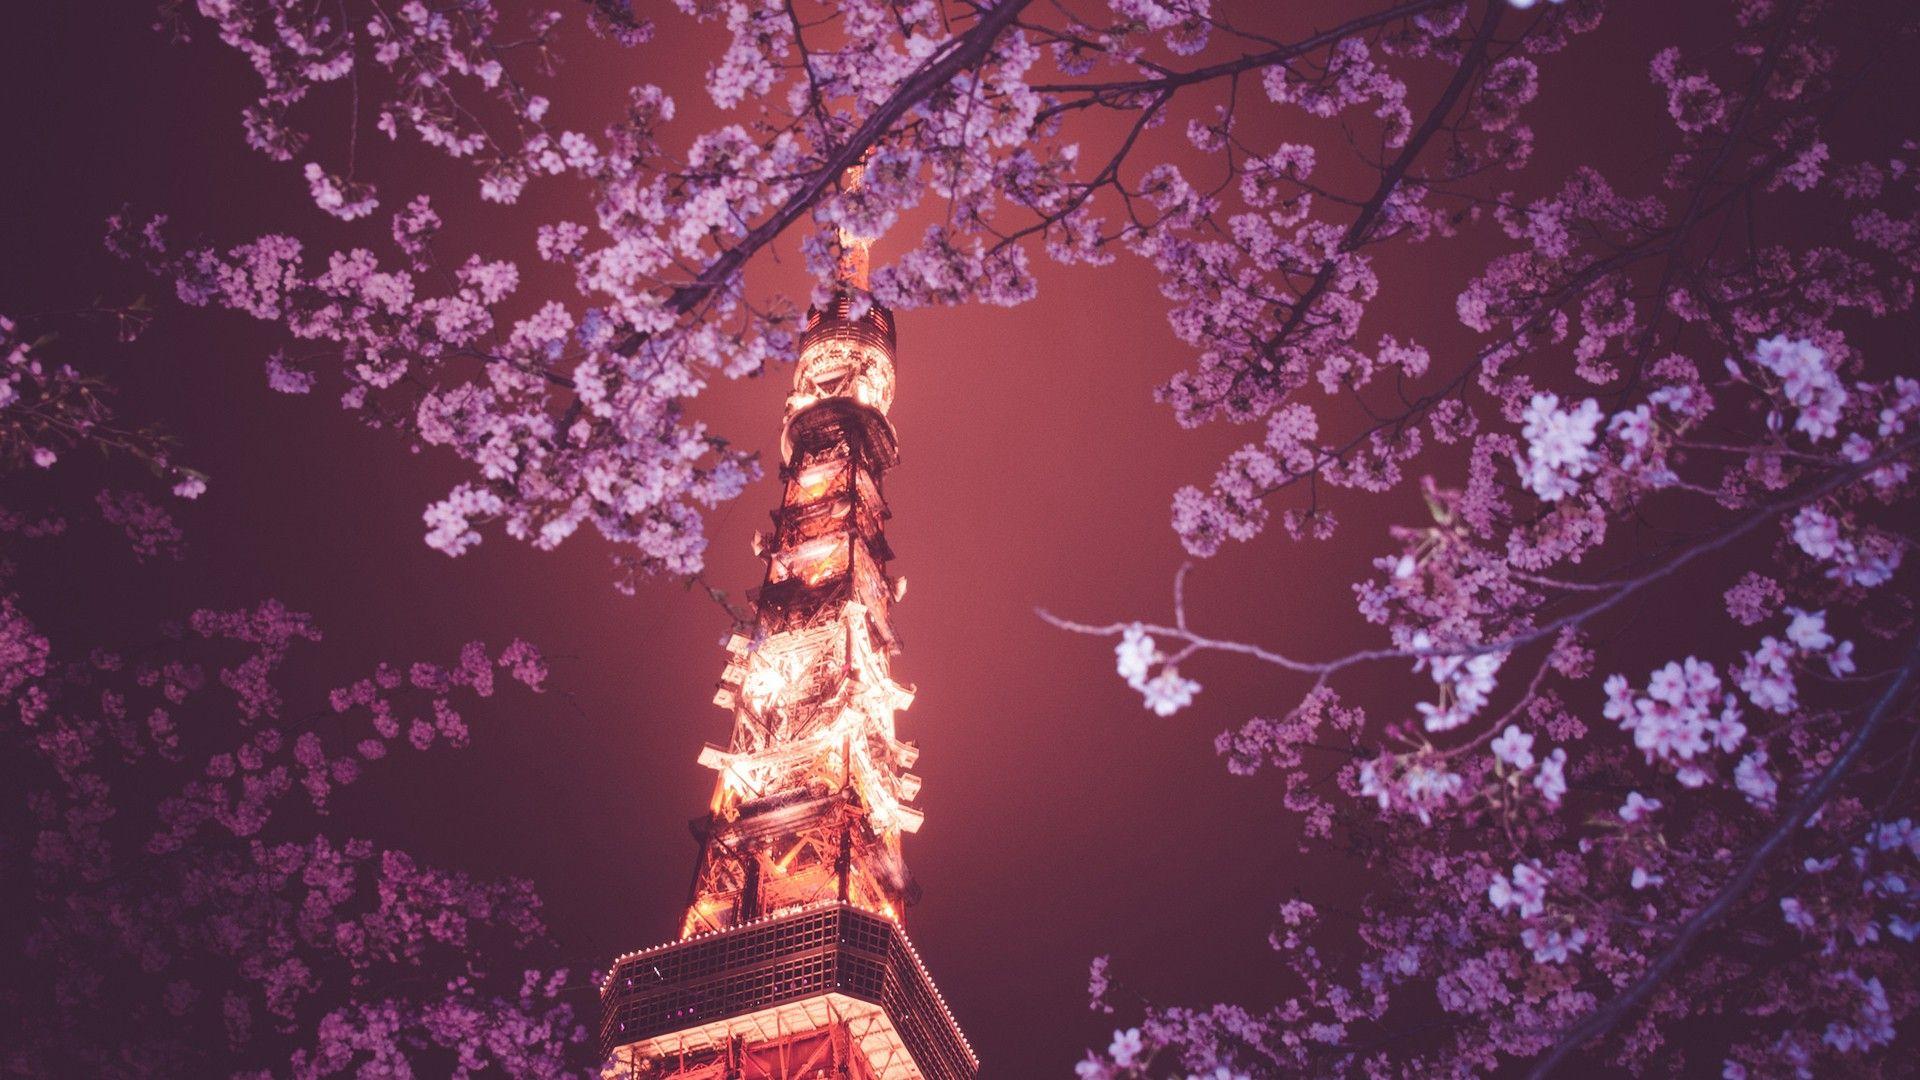 Cherry Blossom Tree At Night Wallpapers Top Free Cherry Blossom Tree